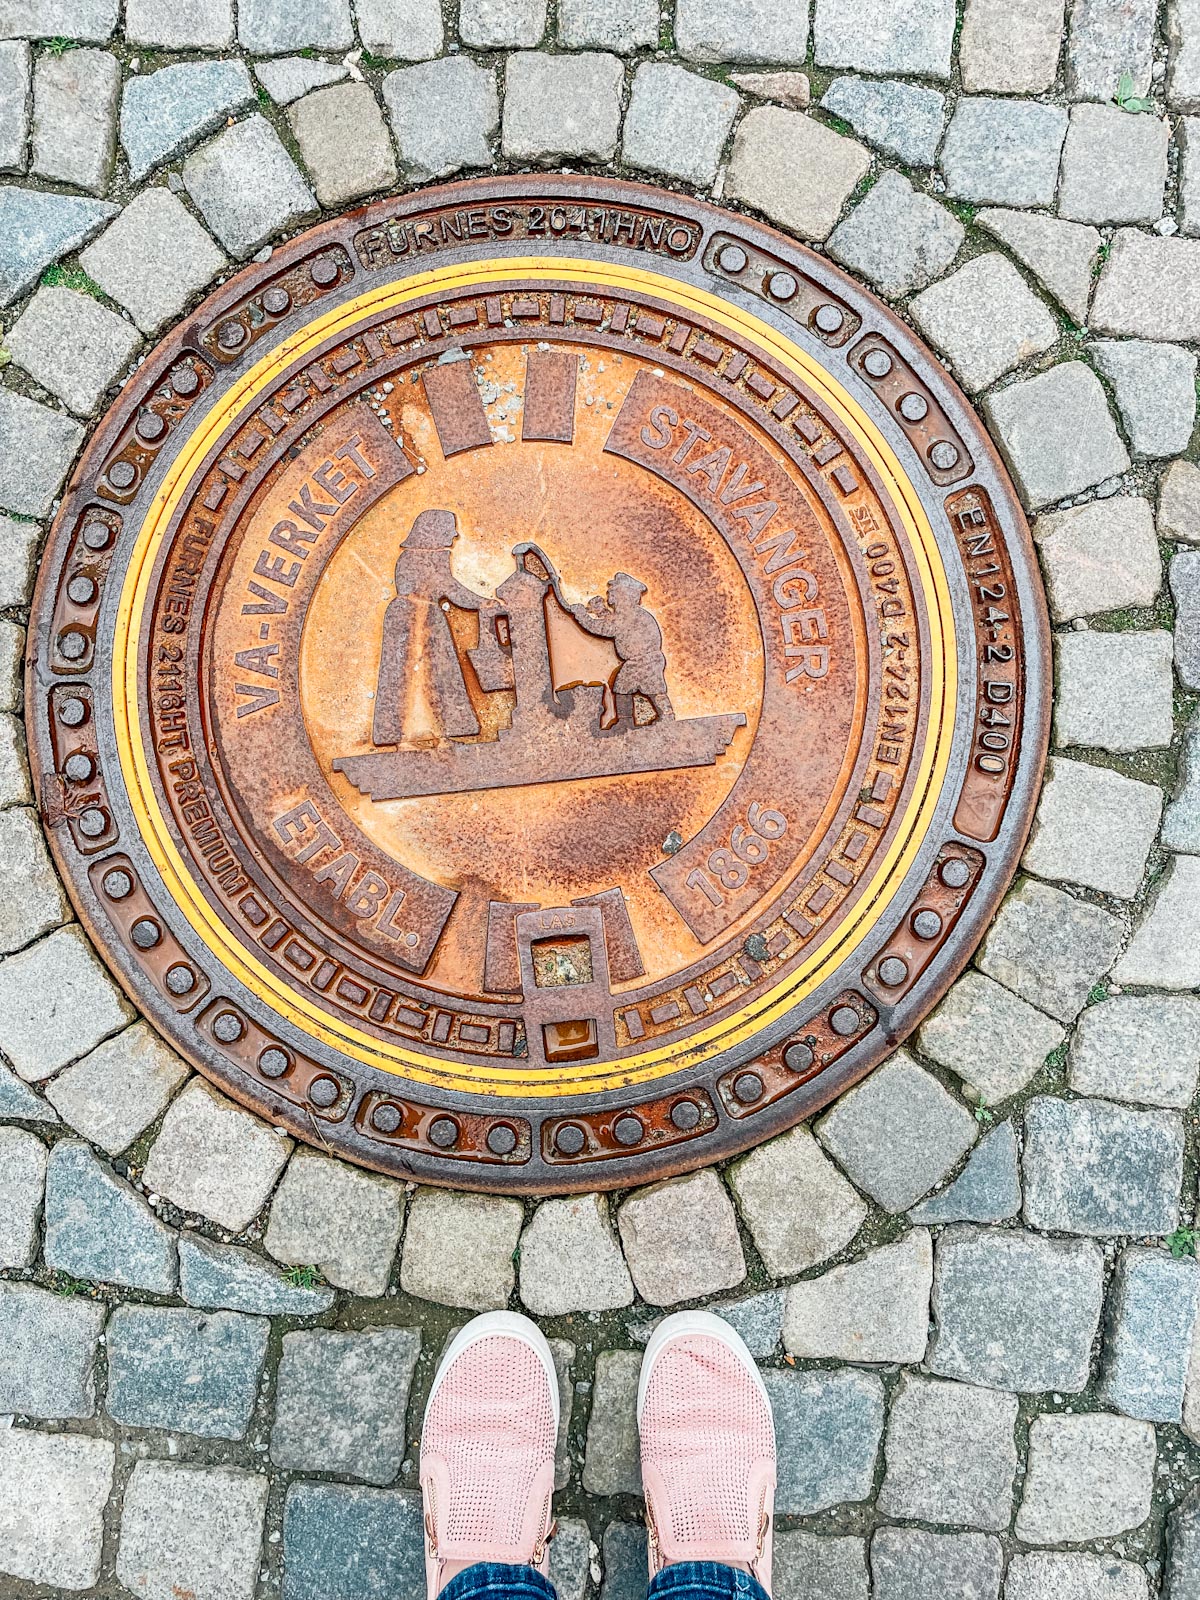 Check out the manhole covers too